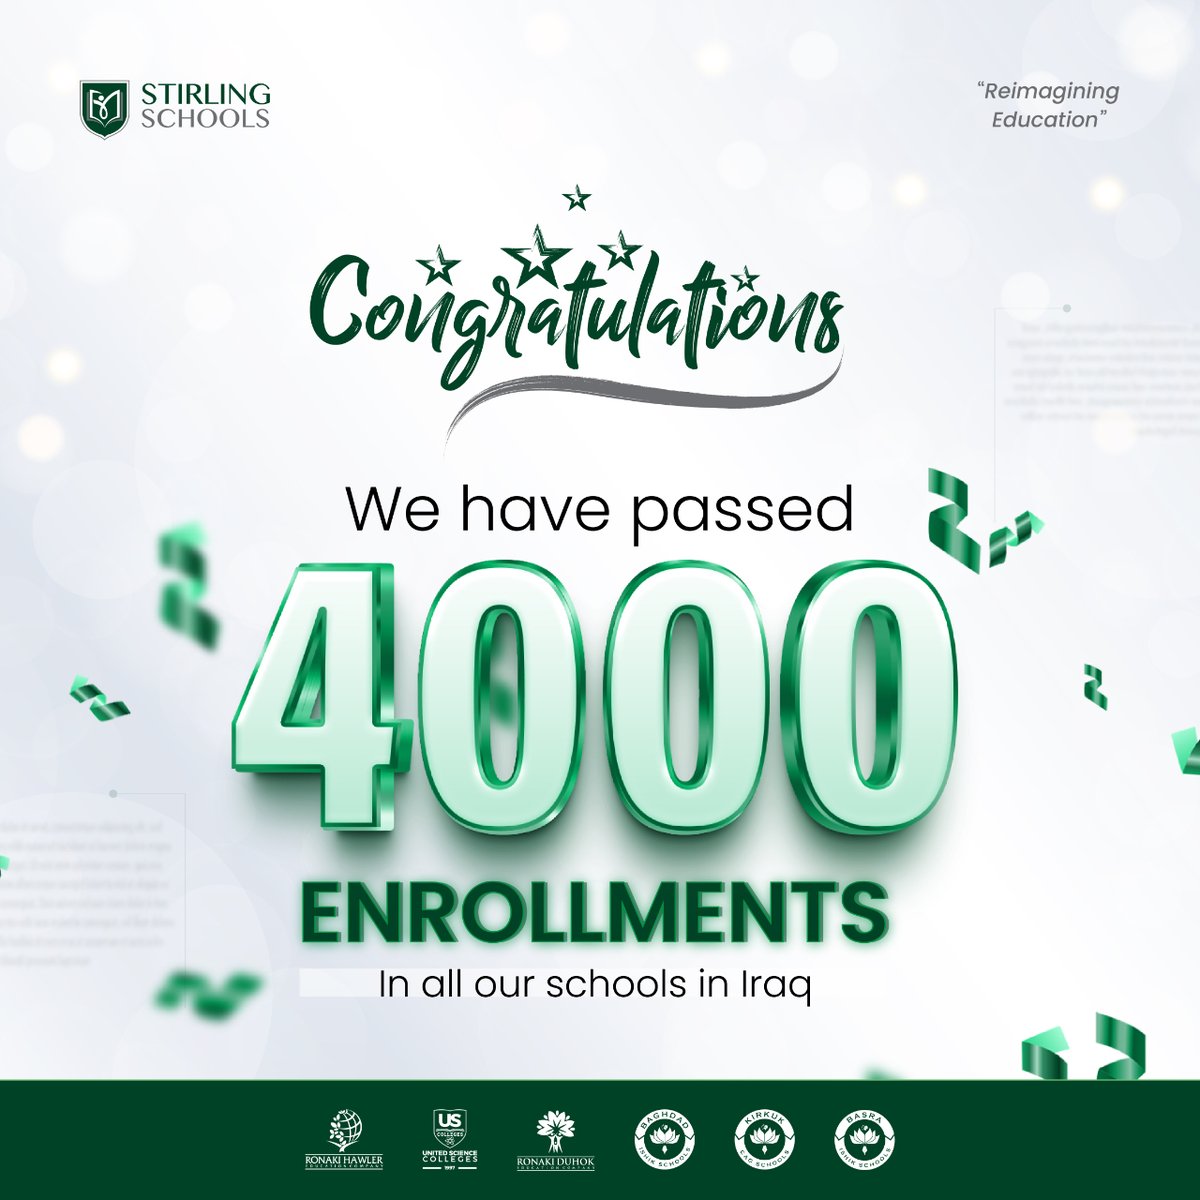 We surpassed 4,000 early registrations!
 
We're thrilled to announce that over 4,000 students have enrolled in our Stirling Schools across Iraq & KRI during the early registration!
 
#StirlingSchools #StirlingEducation #ReimaginingEducation #EarlyRegistrationEnrollment